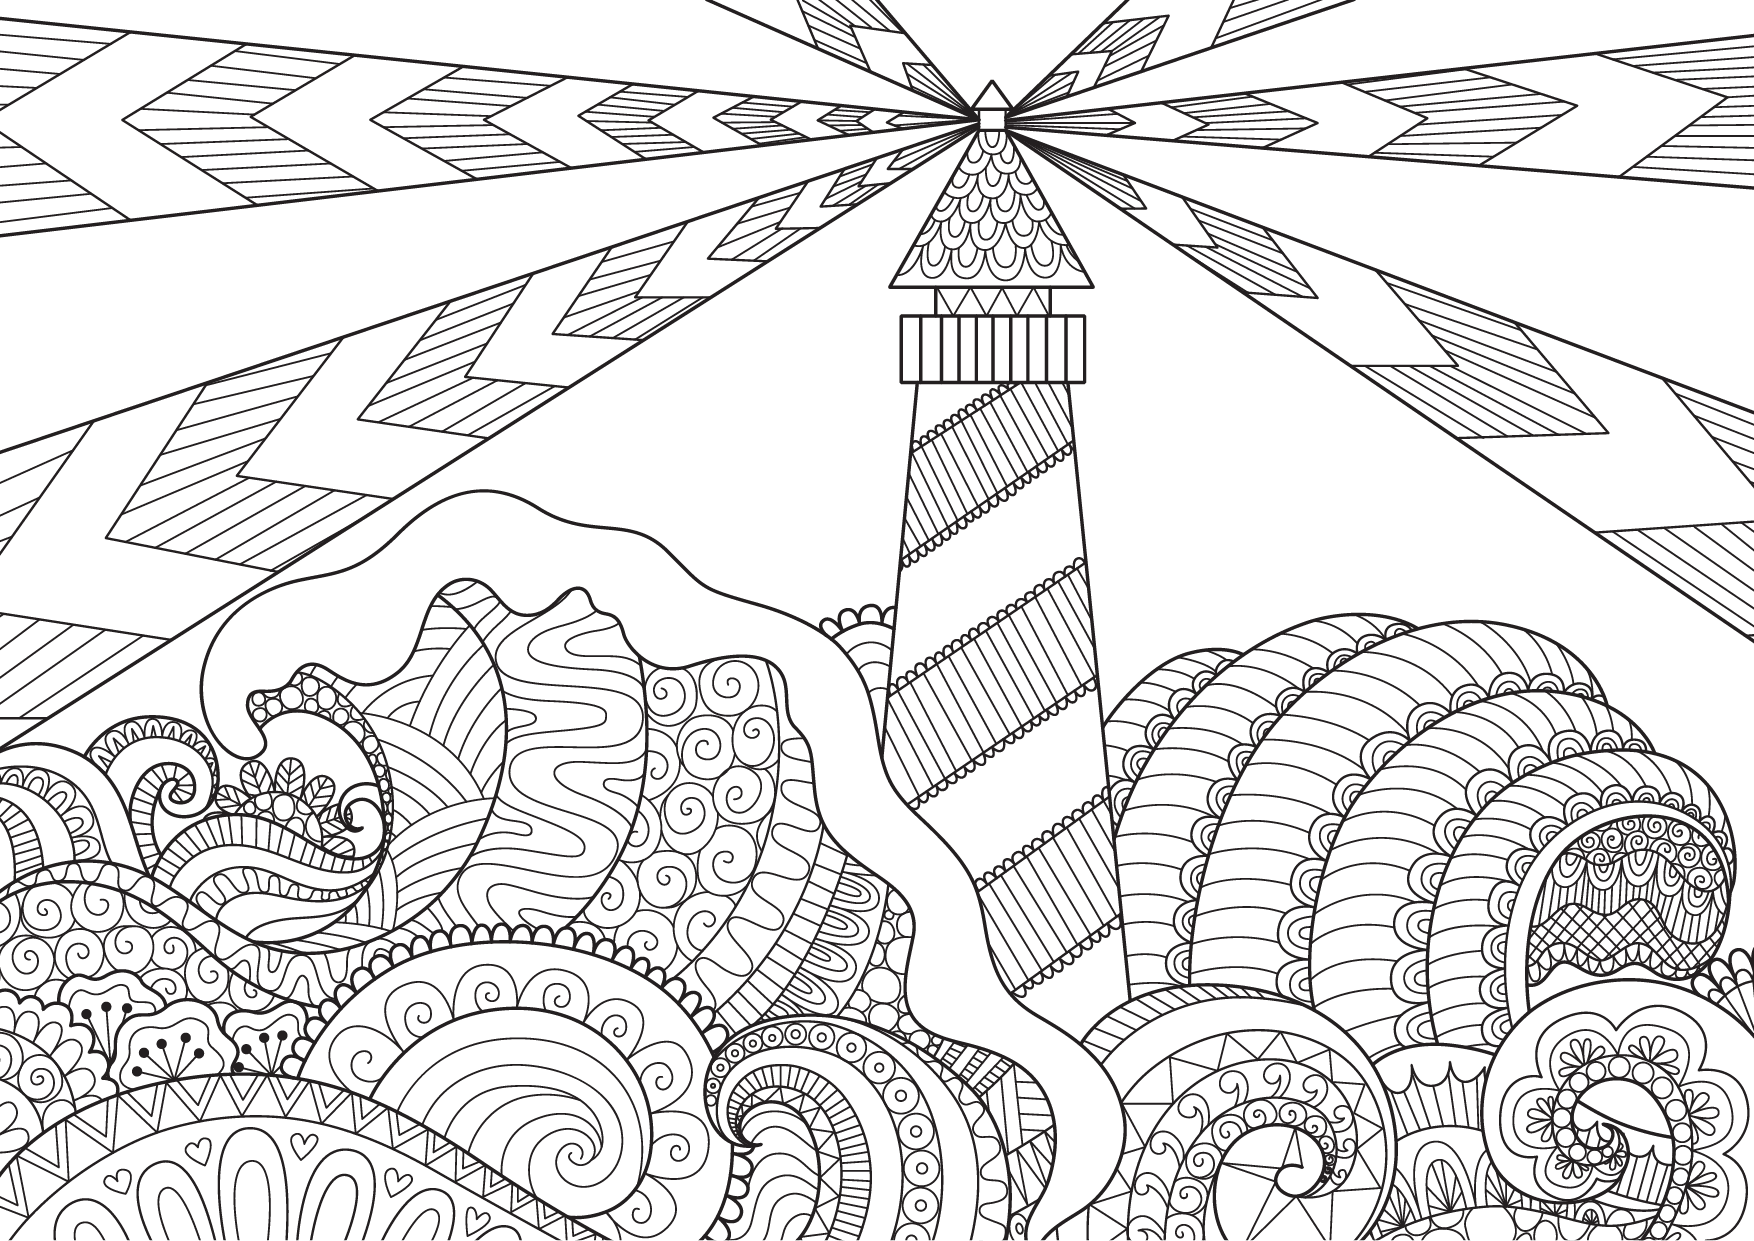 Lighthouse Waves Colouring Sheet - Colouring Crafts